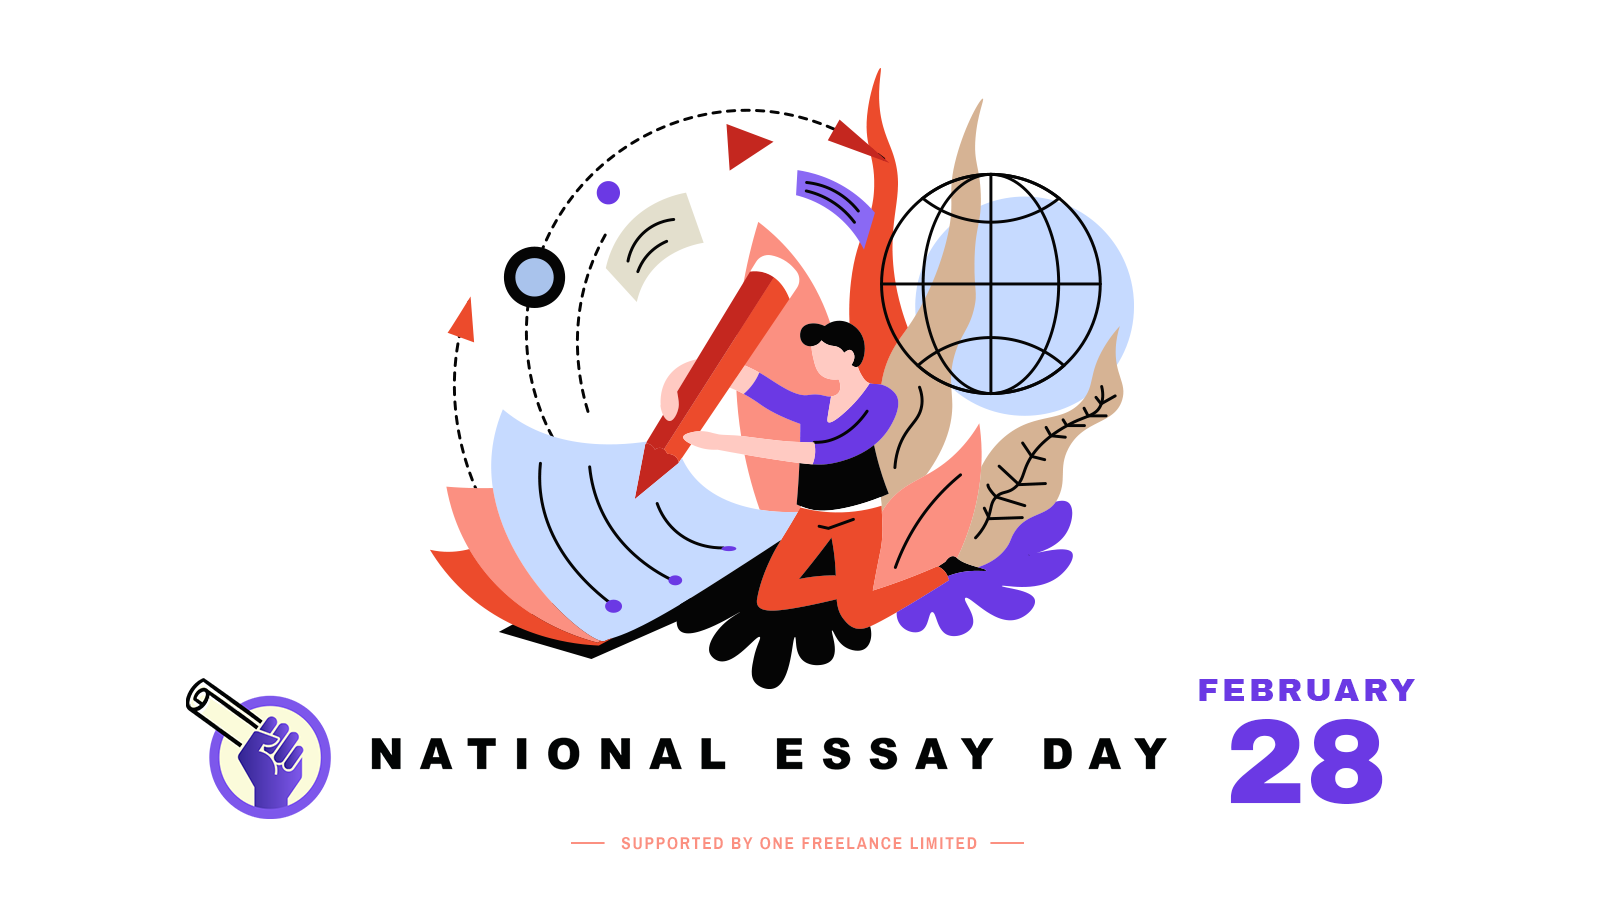 National Essay Day to be Celebrated on February 28: a Great Change in Spring 2020 Academic Calendar